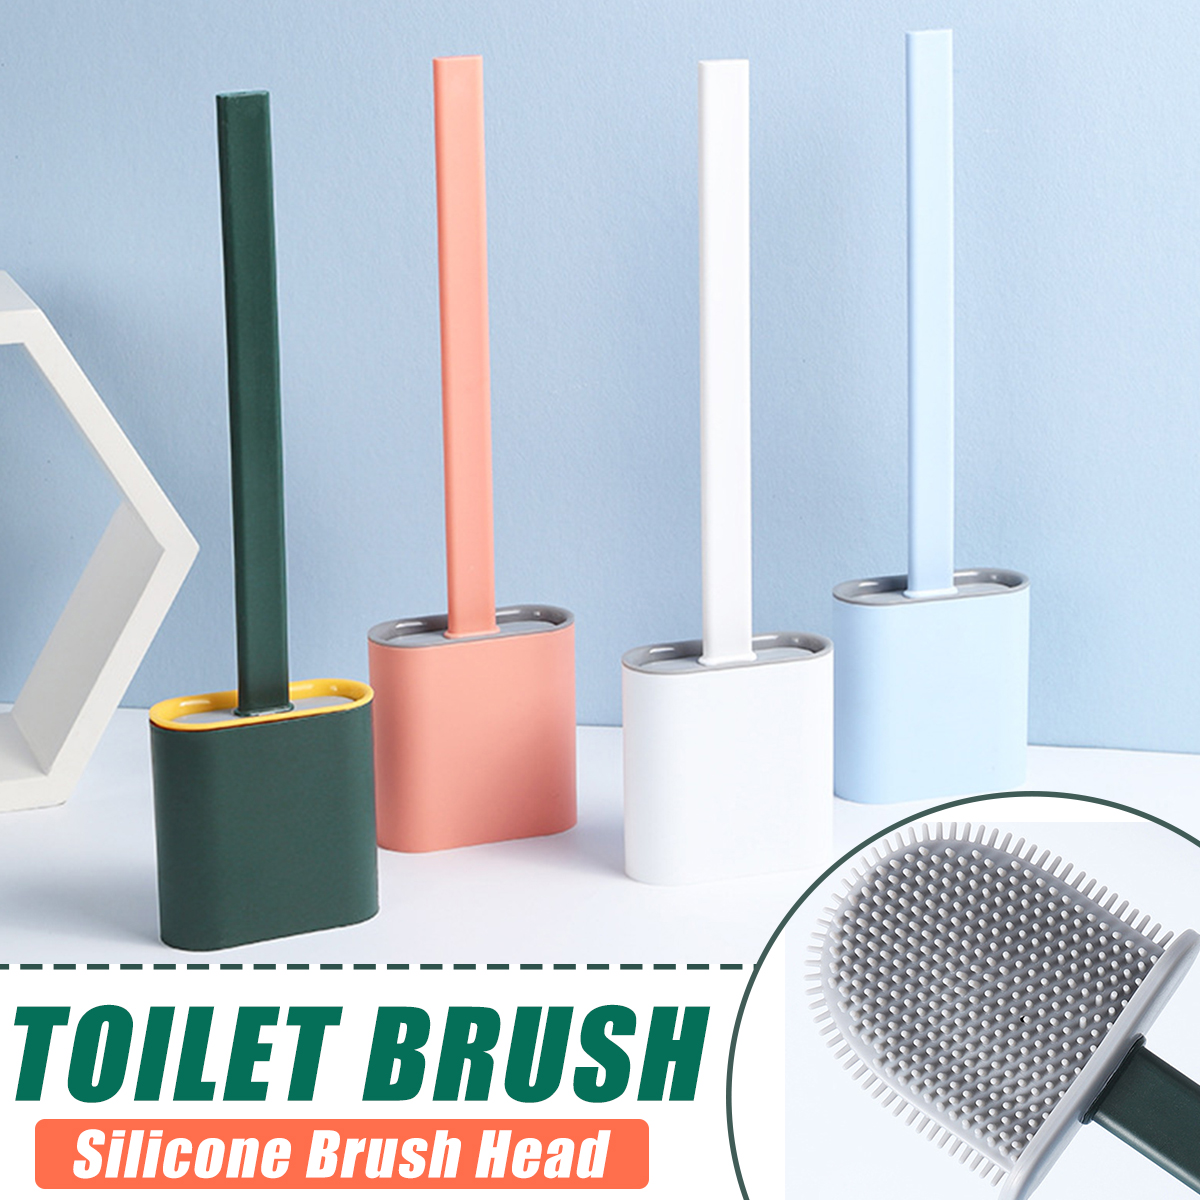 Silicone-Toilet-Brush-With-Toilet-Brush-Holder-Stand-Bathroom-Cleaning-Tool-1761413-1